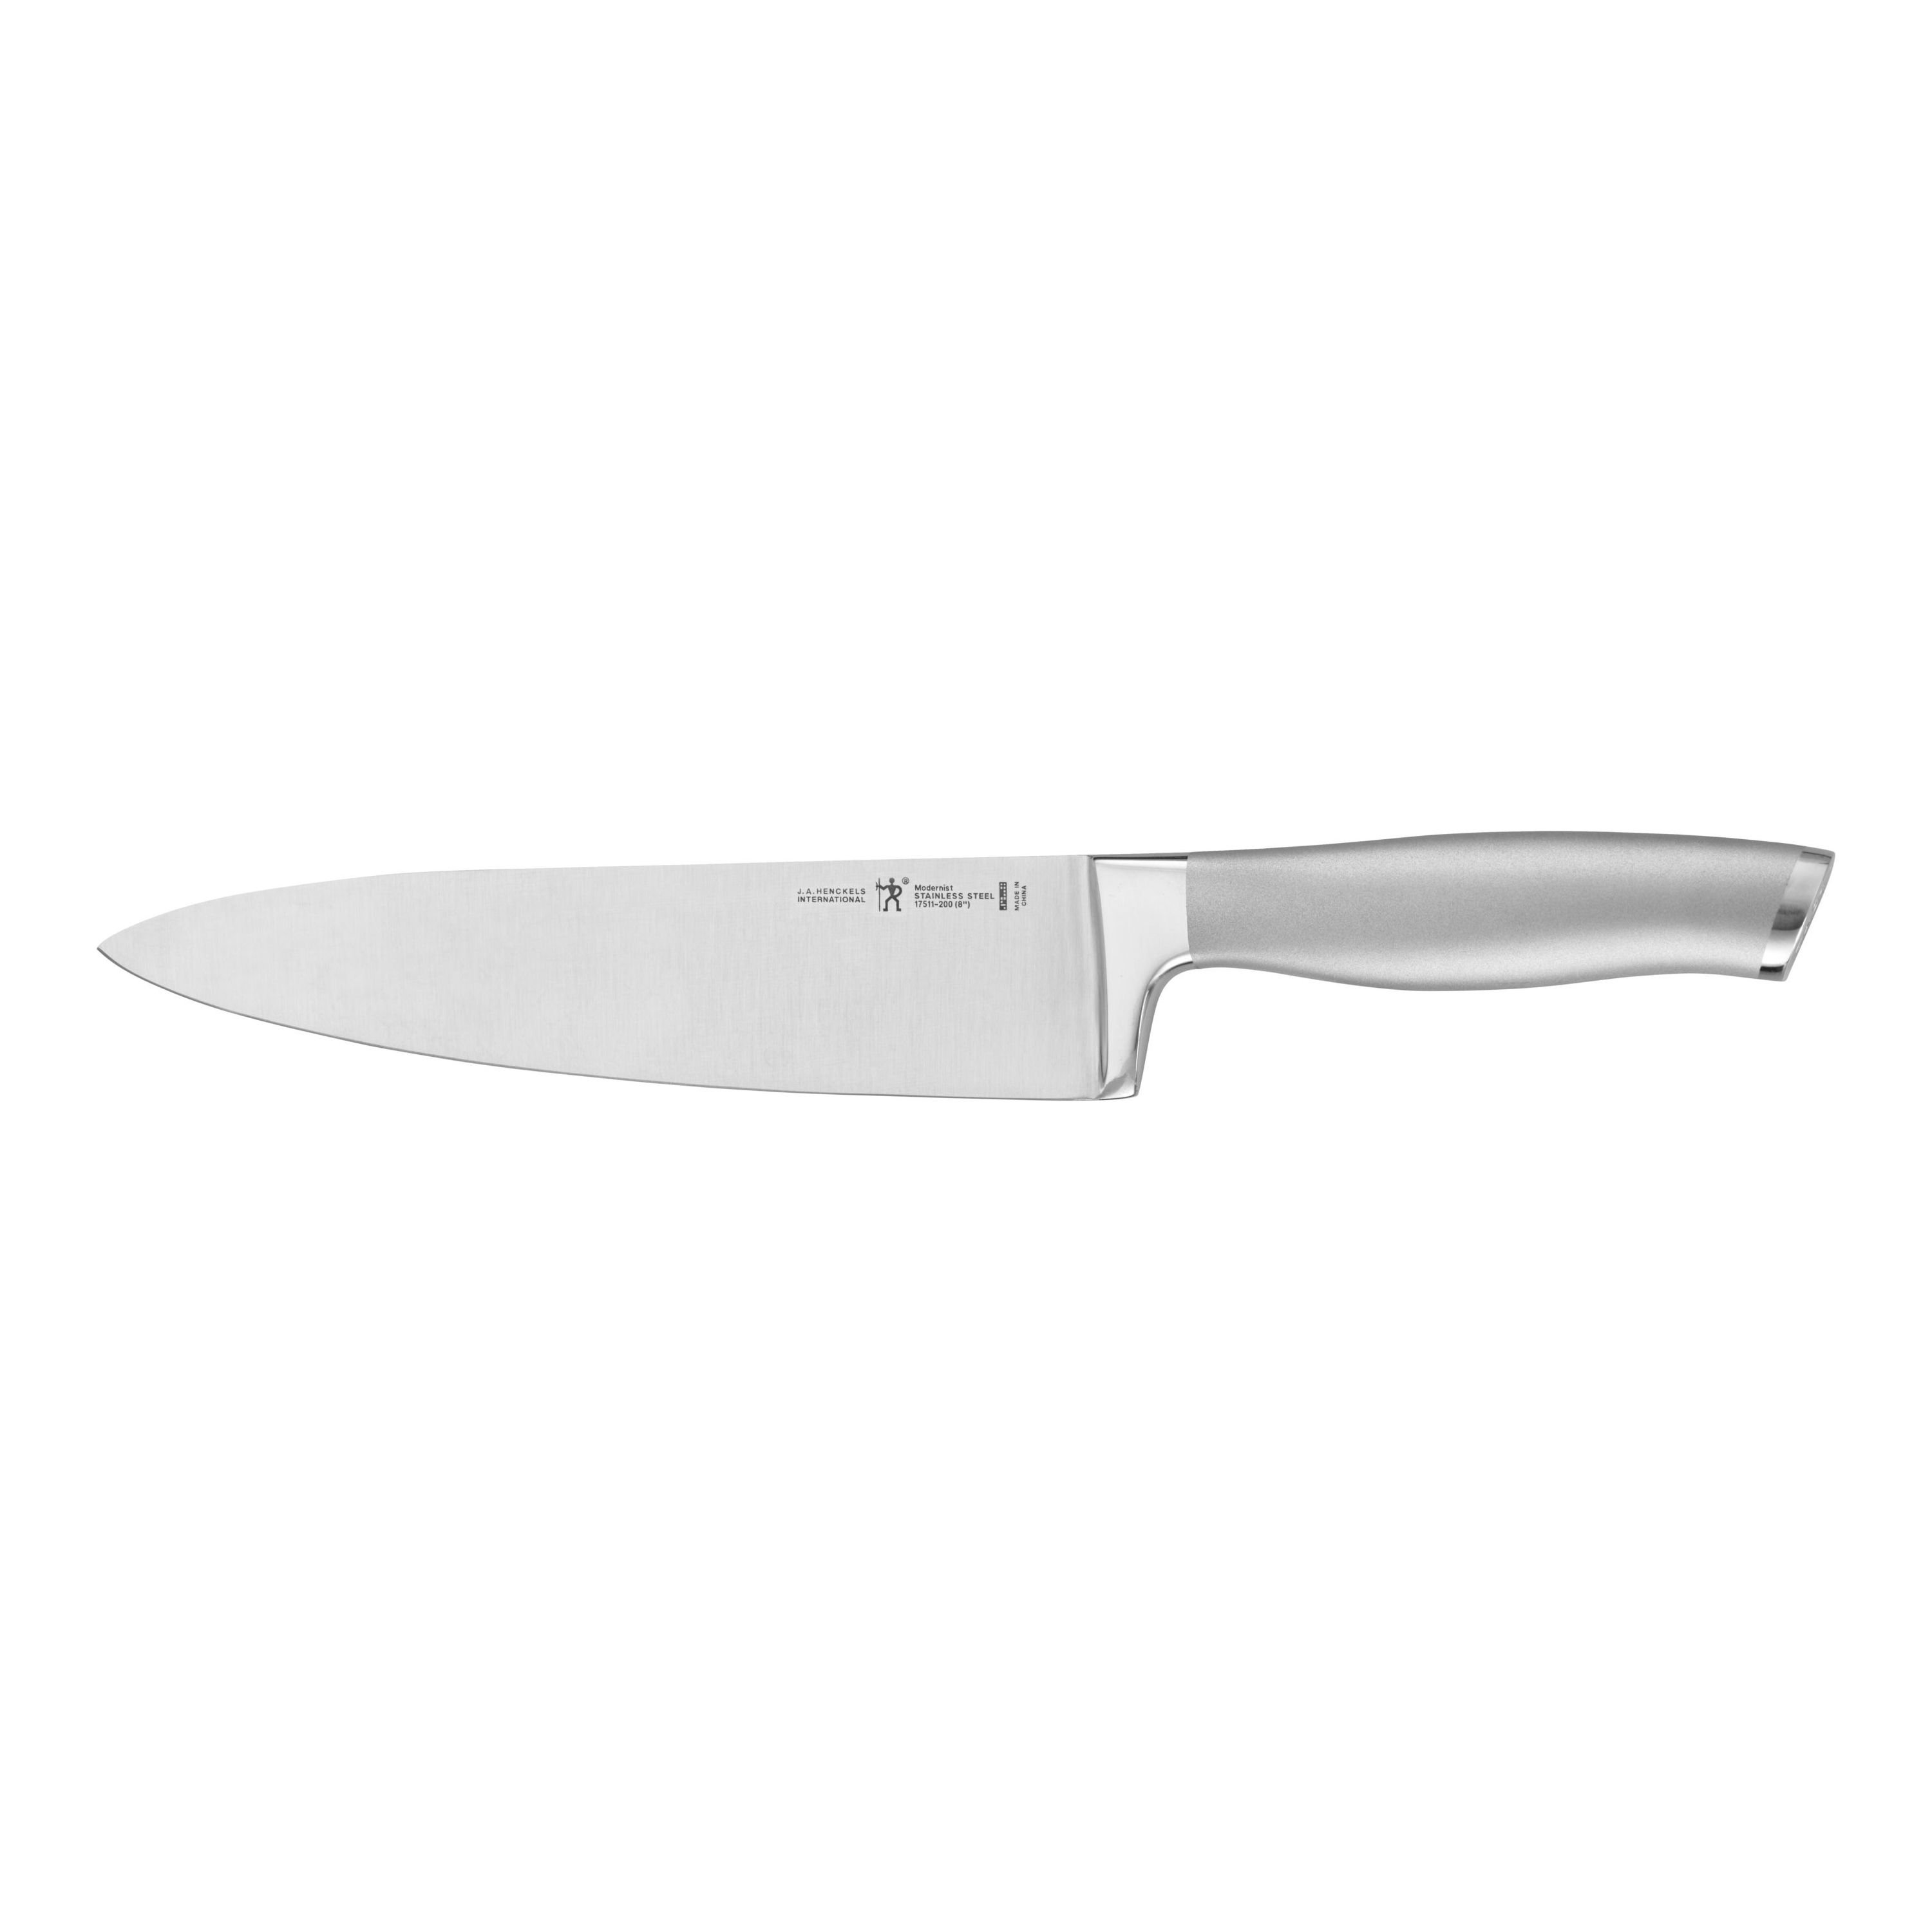 Gourmet Easy - Stainless Steel Blade Chef Kitchen Knife - 8 inches, Silver